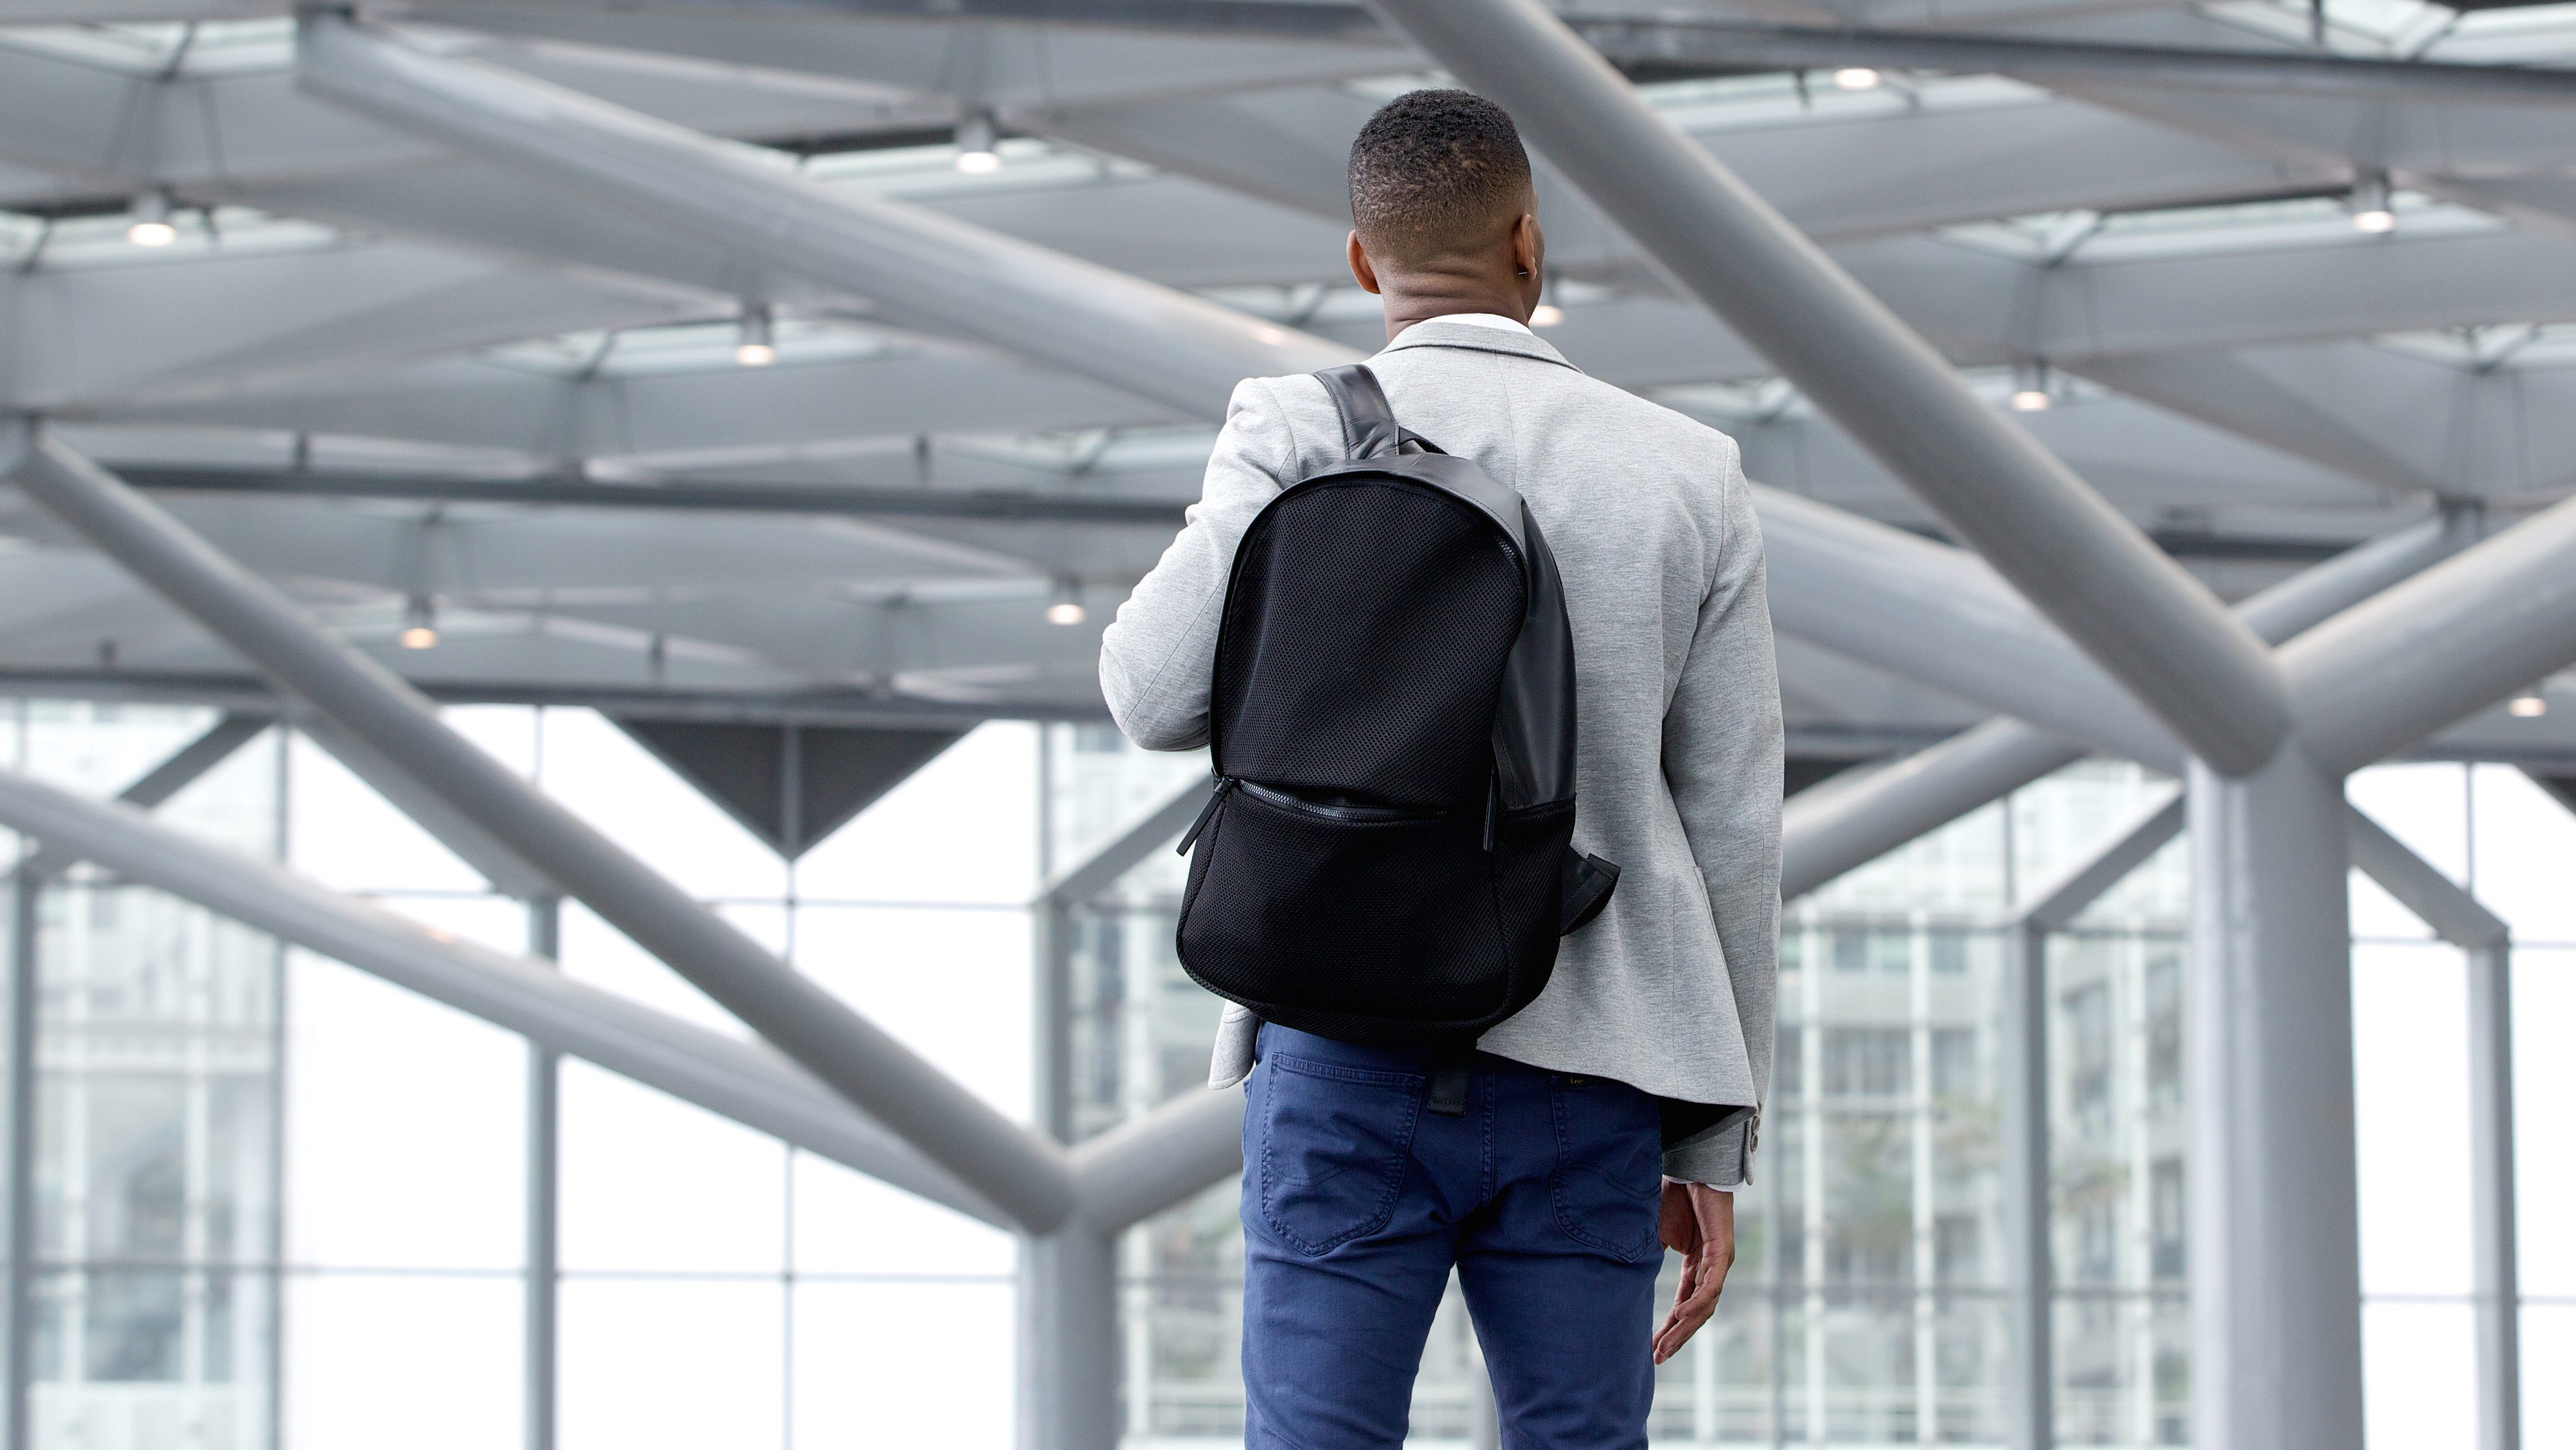 Fit Your Backpack to Avoid Back and Neck Pain